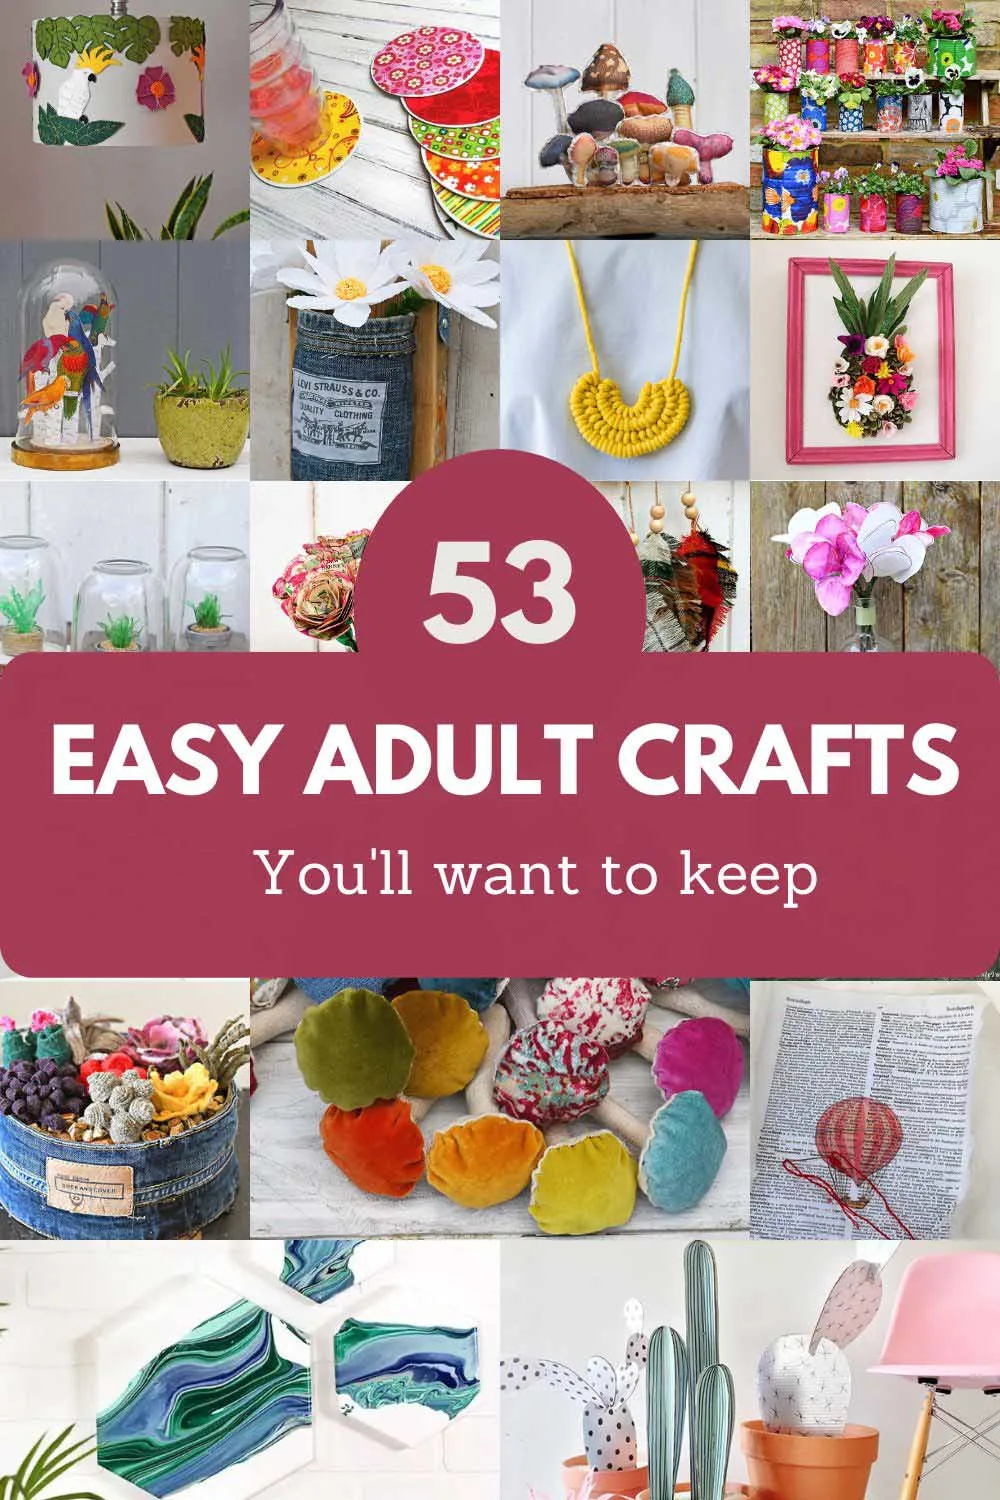 15 DIY and Crafts For Adults - Cool Crafts For Adults  Easy crafts, Diy  crafts for adults, Easy arts and crafts